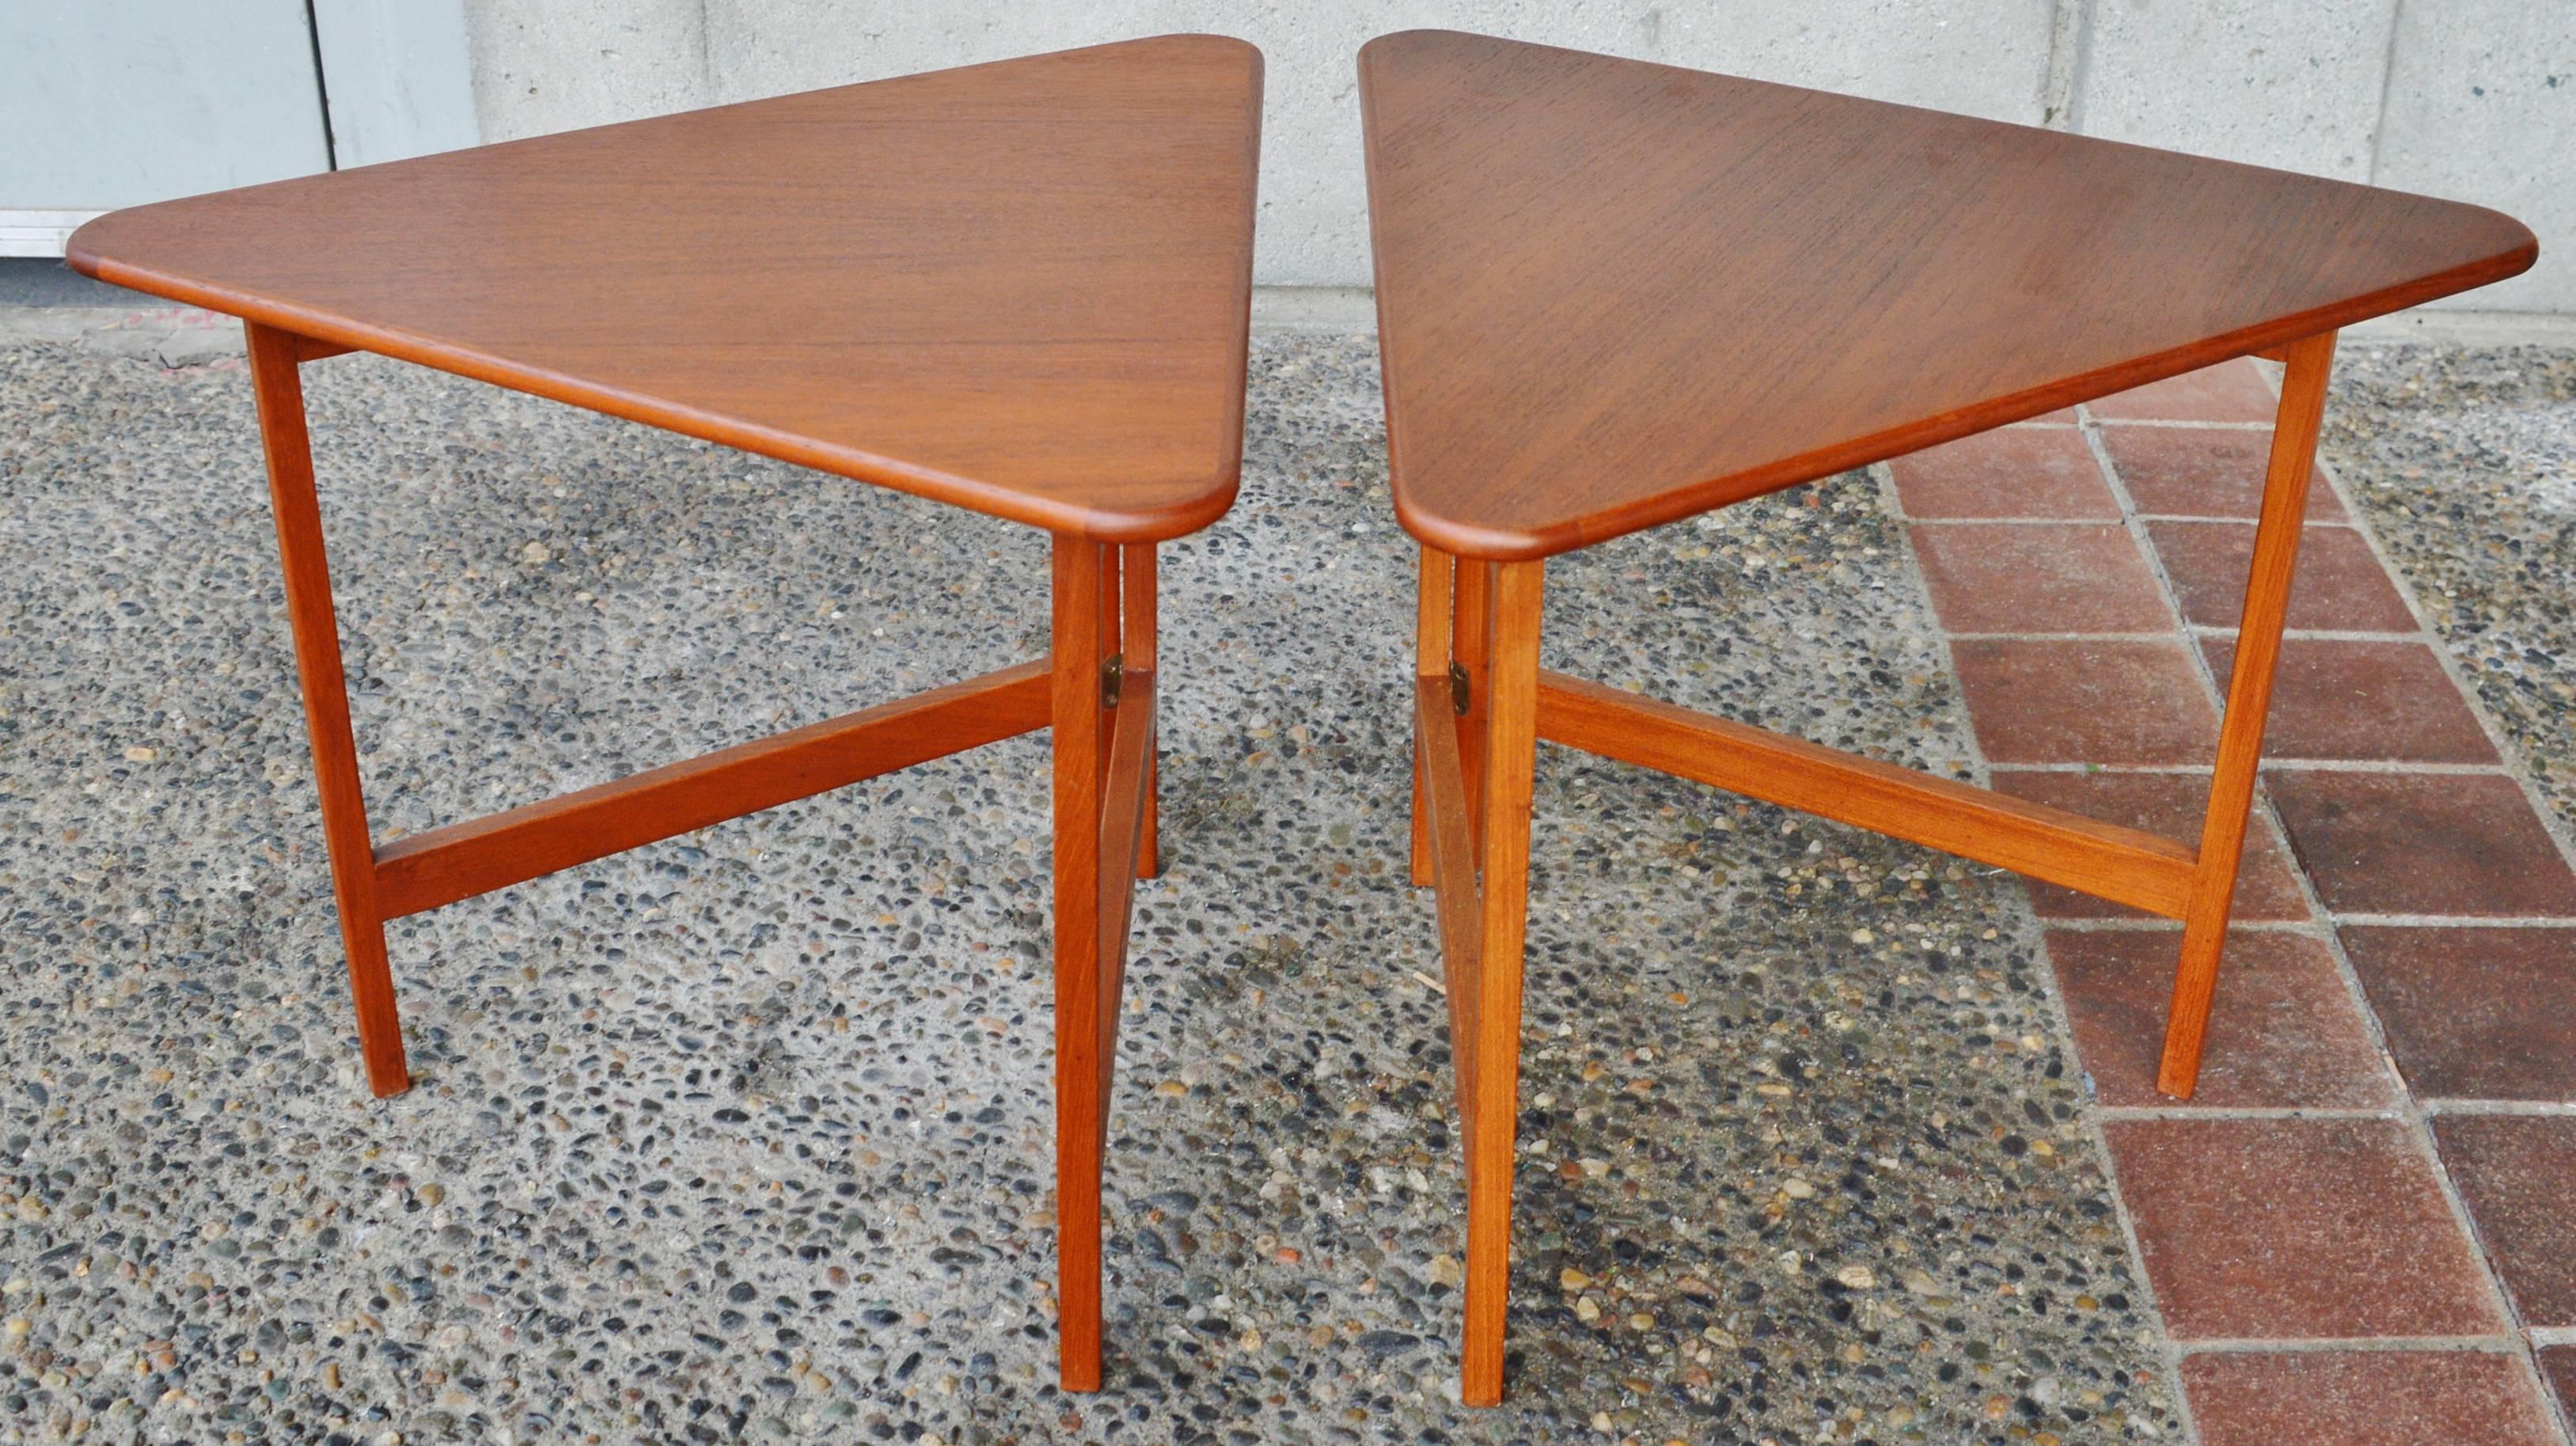 Pair of Danish Teak Illum Wikkelsø Folding Coffee or Side Tables for Silkeborg In Excellent Condition For Sale In New Westminster, British Columbia